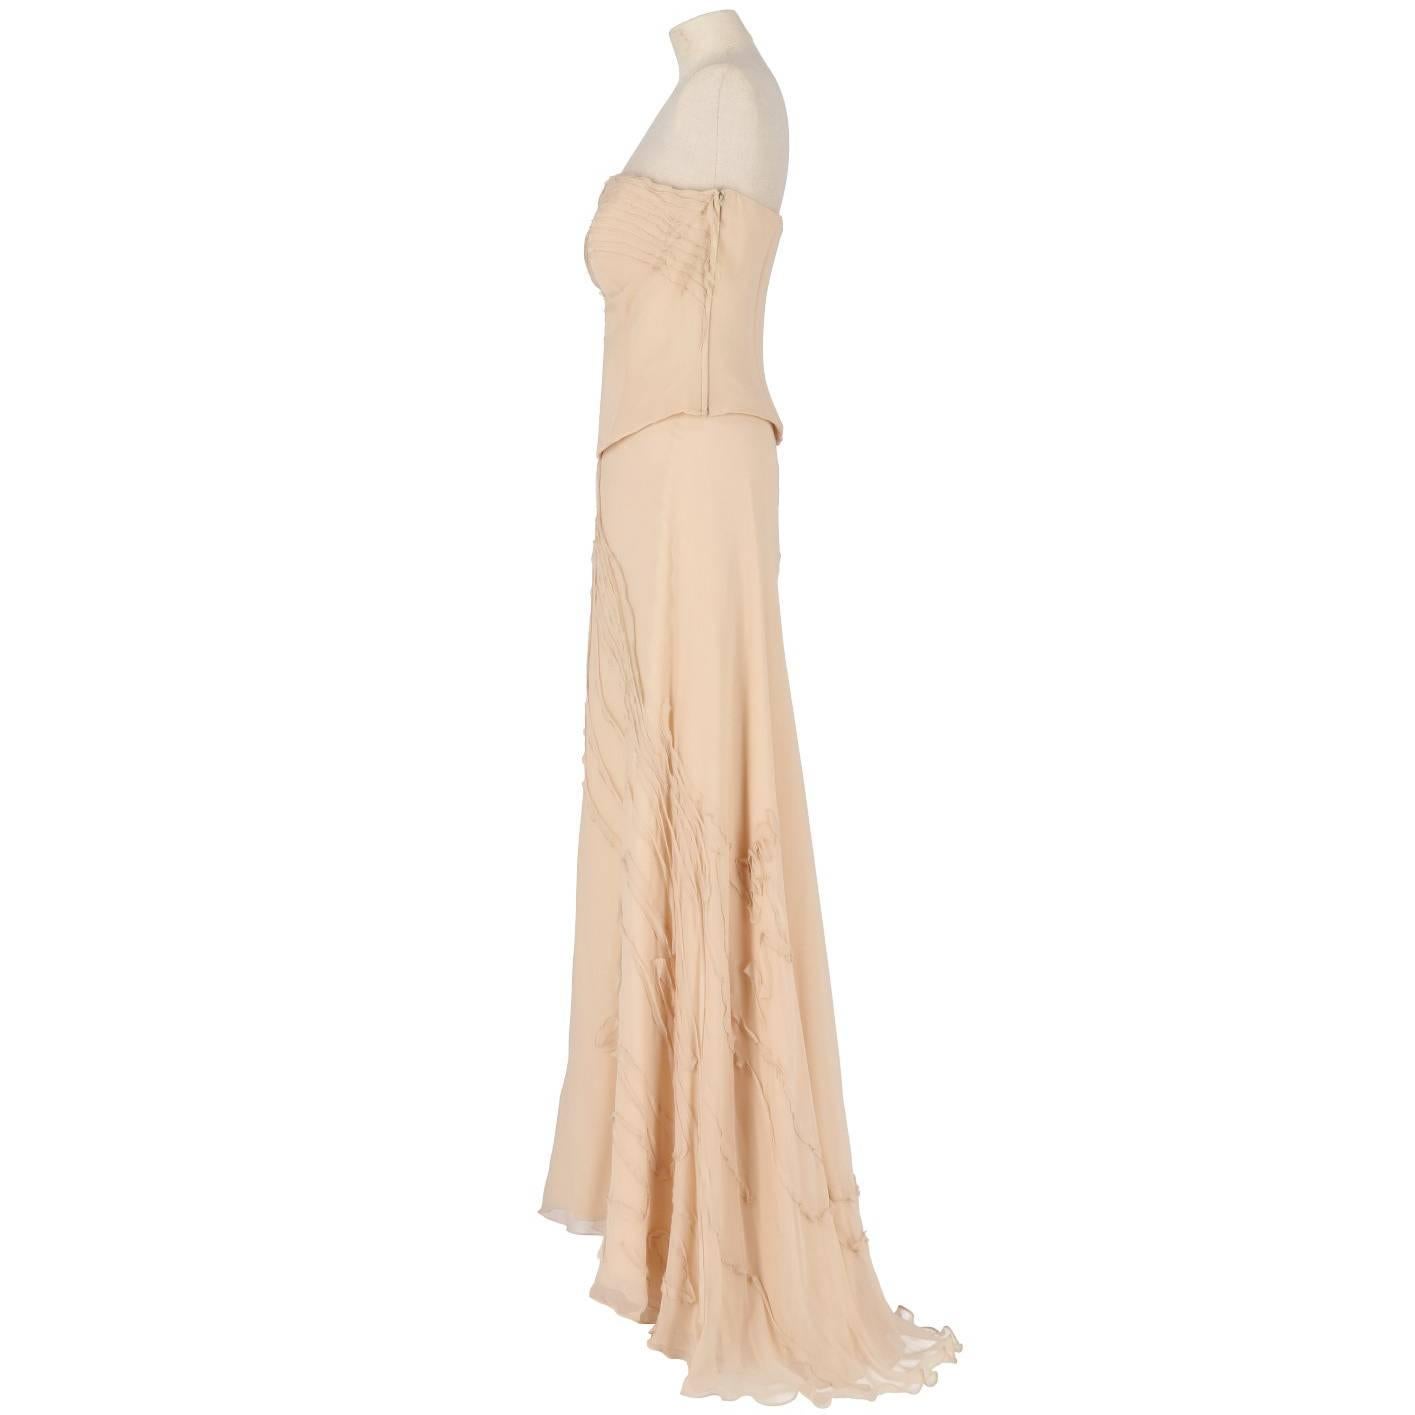 Delicate Sara & Rose silk wedding suit in a feminine pink blush color. It features a sweetheart neckline top and a lightly flared skirt with a small train. Both the top and the skirt are decorated with thin ruffles. The item is vintage, it was